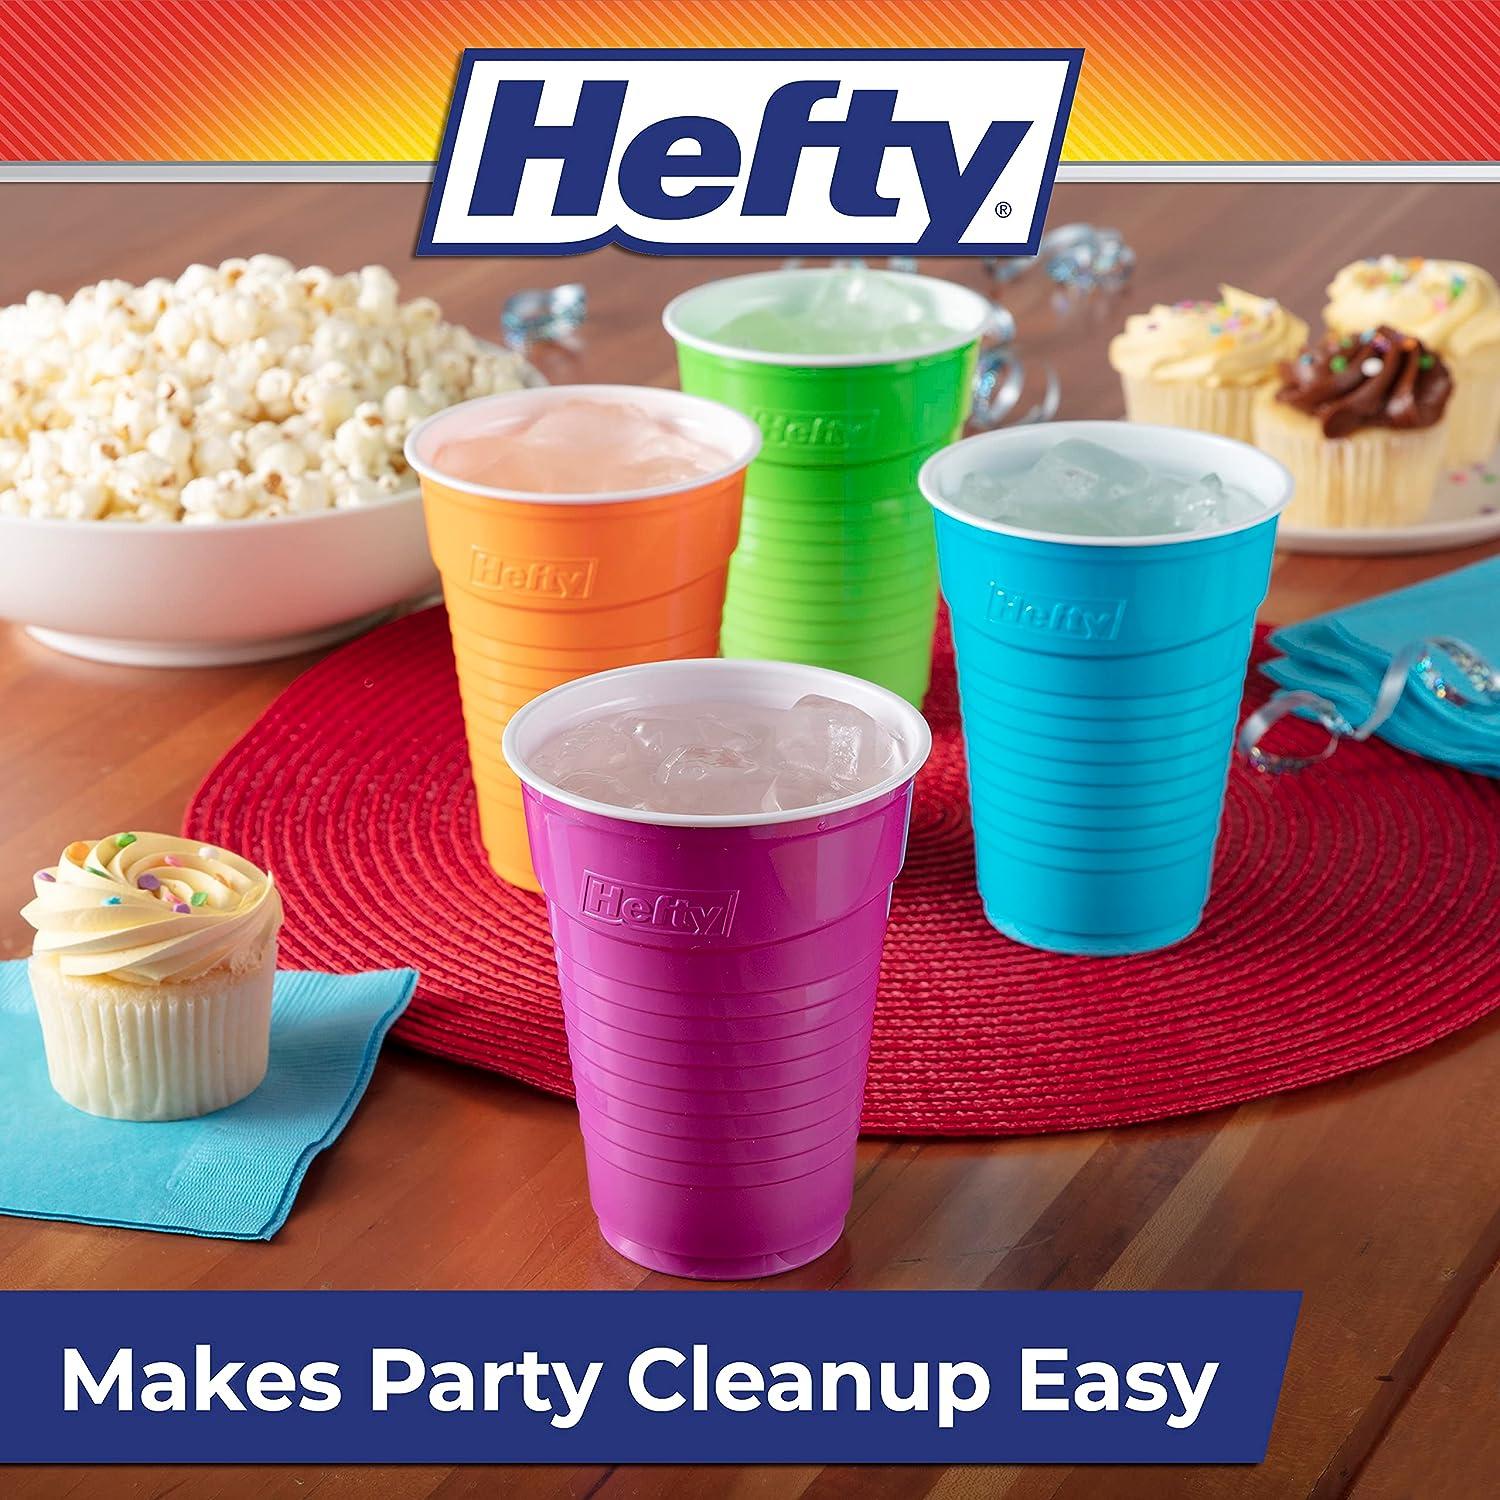 Hefty Party On Disposable Plastic Cups, Assorted, 16 Ounce, 100 Count  Assorted Colors 100 Count (Pack of 1)